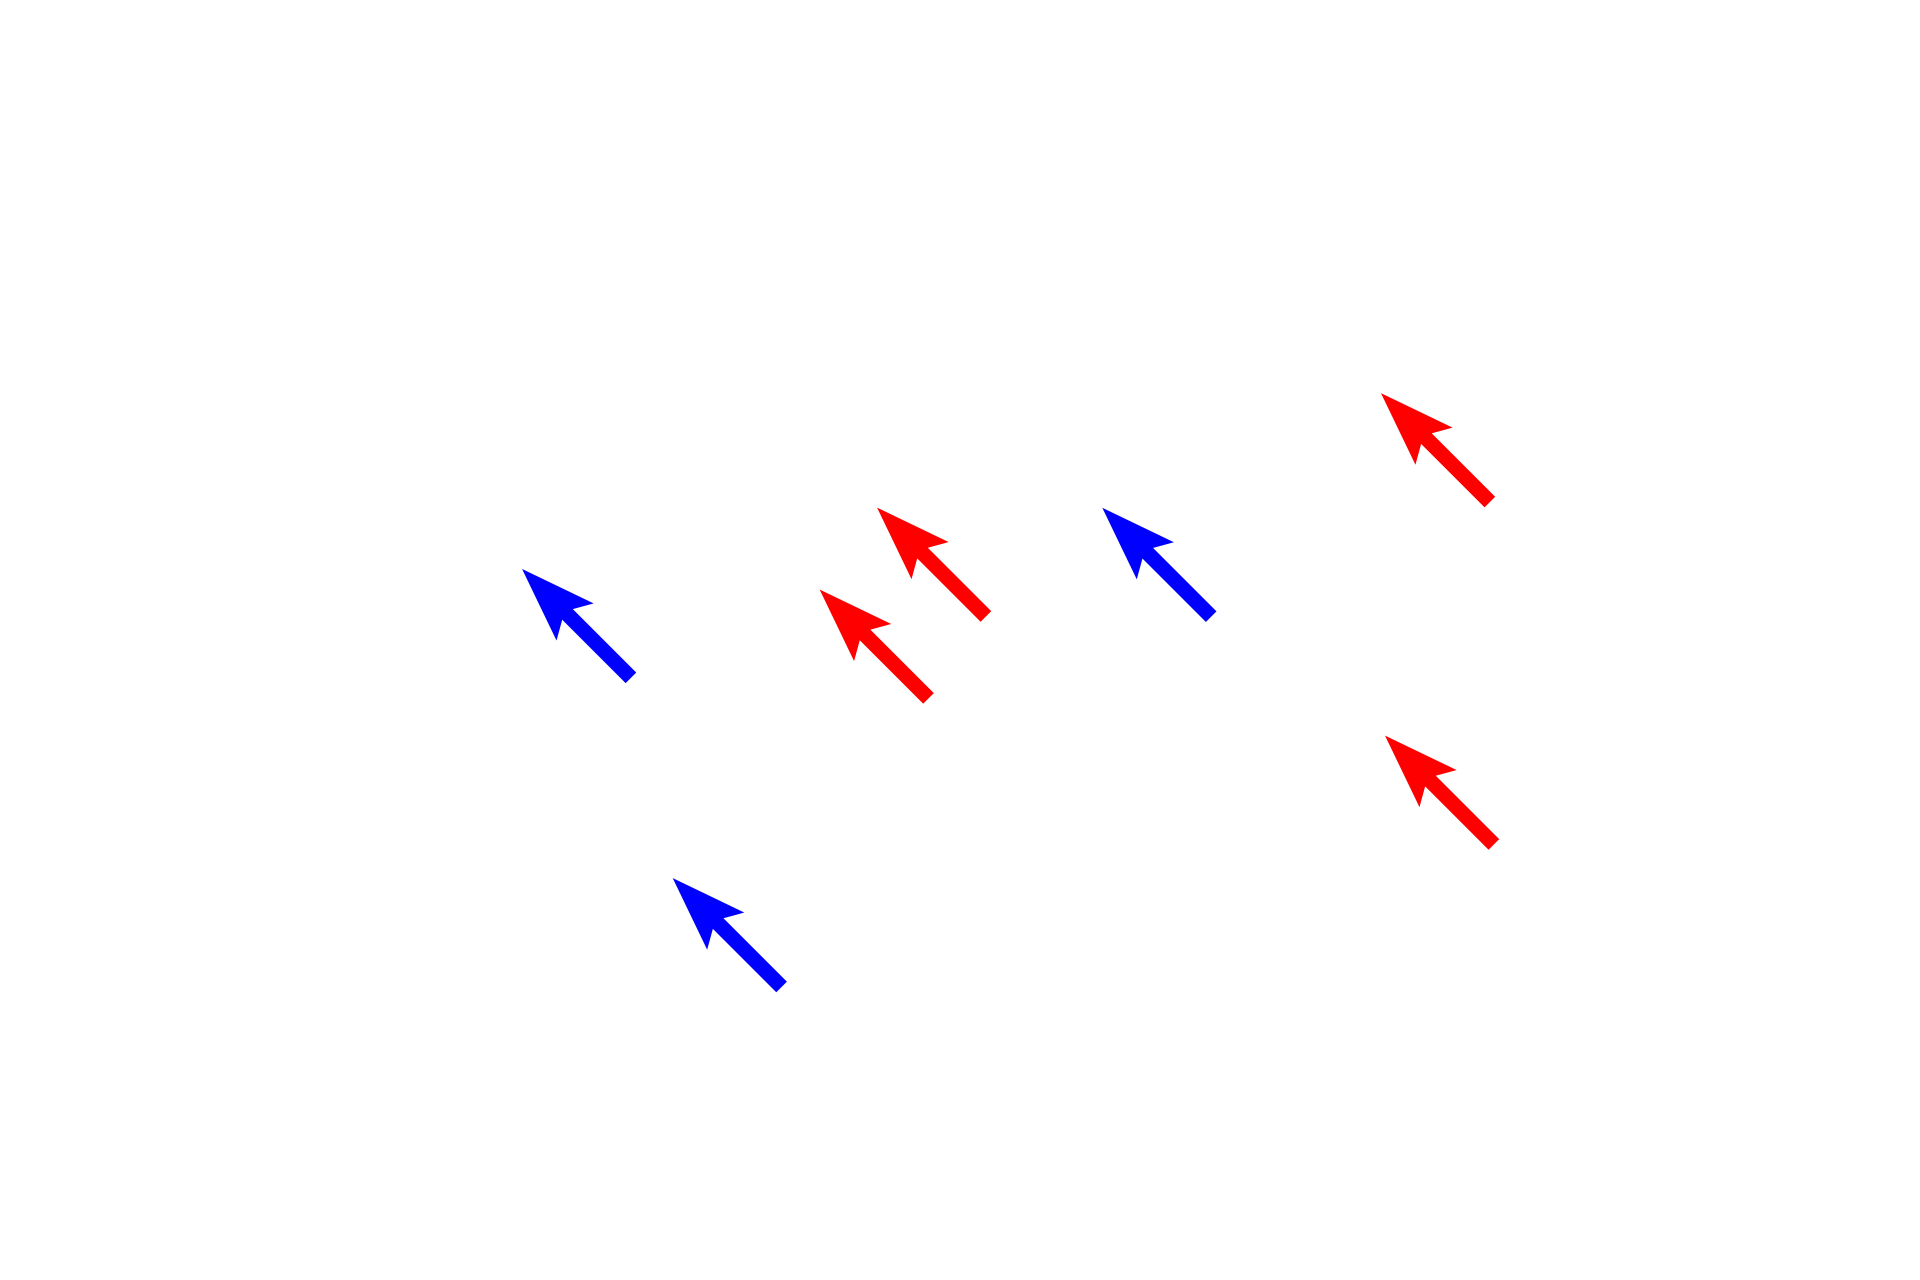 Myofilaments > <p>Thick myofilaments (red arrows) are broader than thin myofilaments and, therefore, are easier to identify. The thin myofilaments are difficult to resolve in this preparation, but are located in the I band (blue arrows) and extend between the thick myofilaments in the A band.</p>
